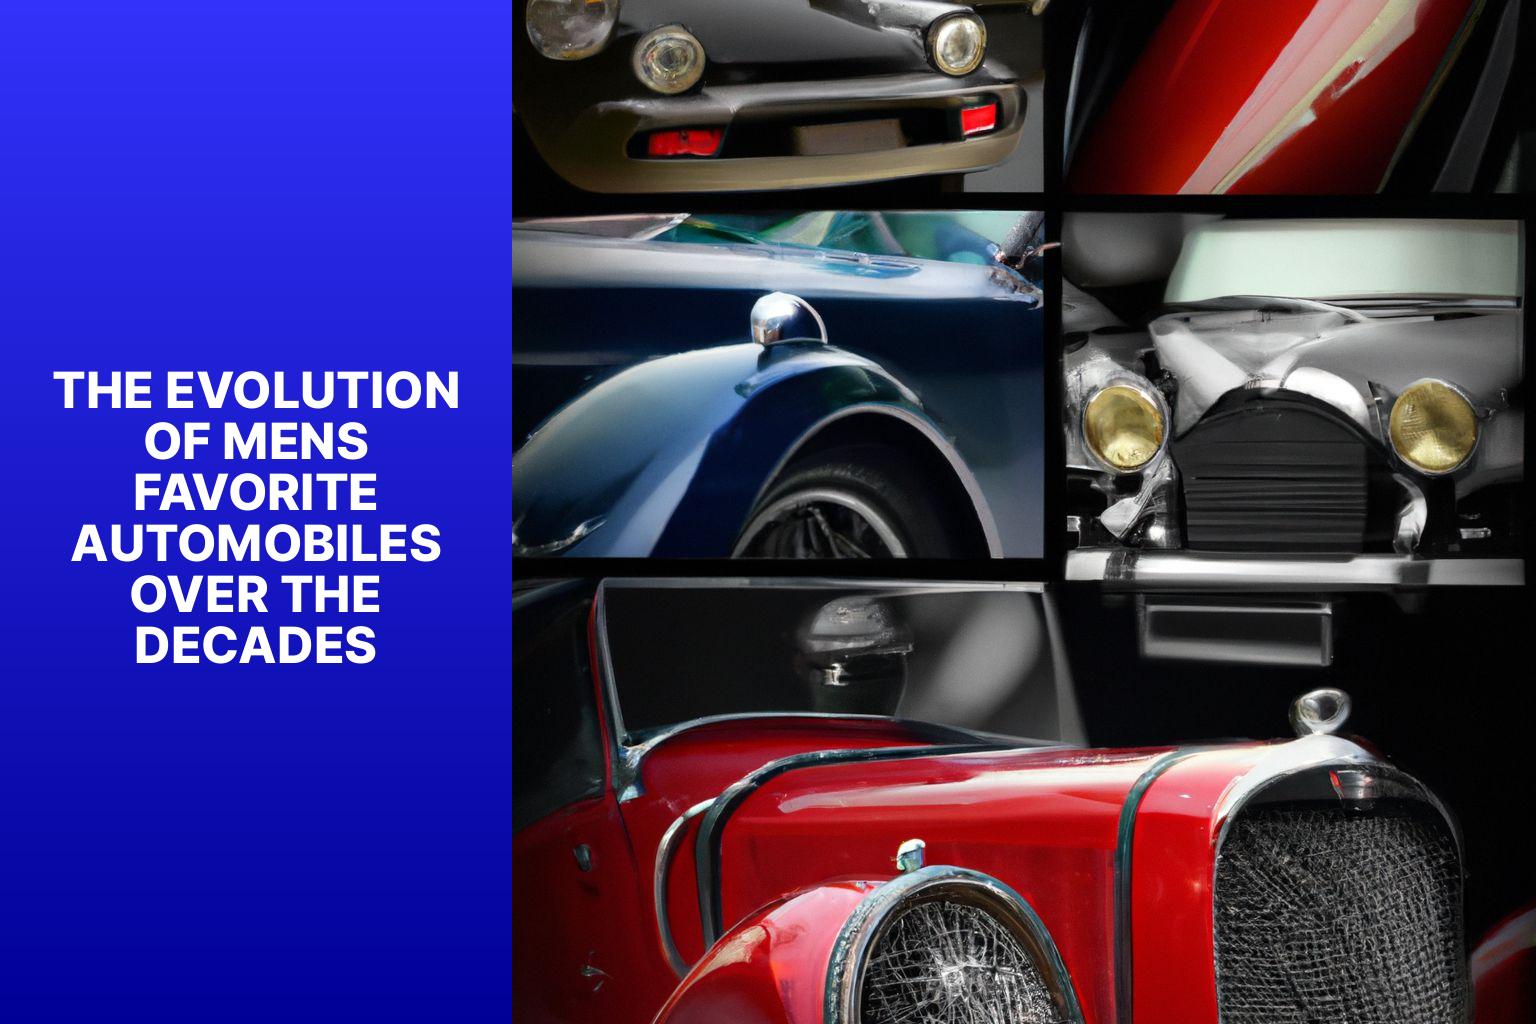 The Evolution of Men’s Favorite Automobiles Over the Decades